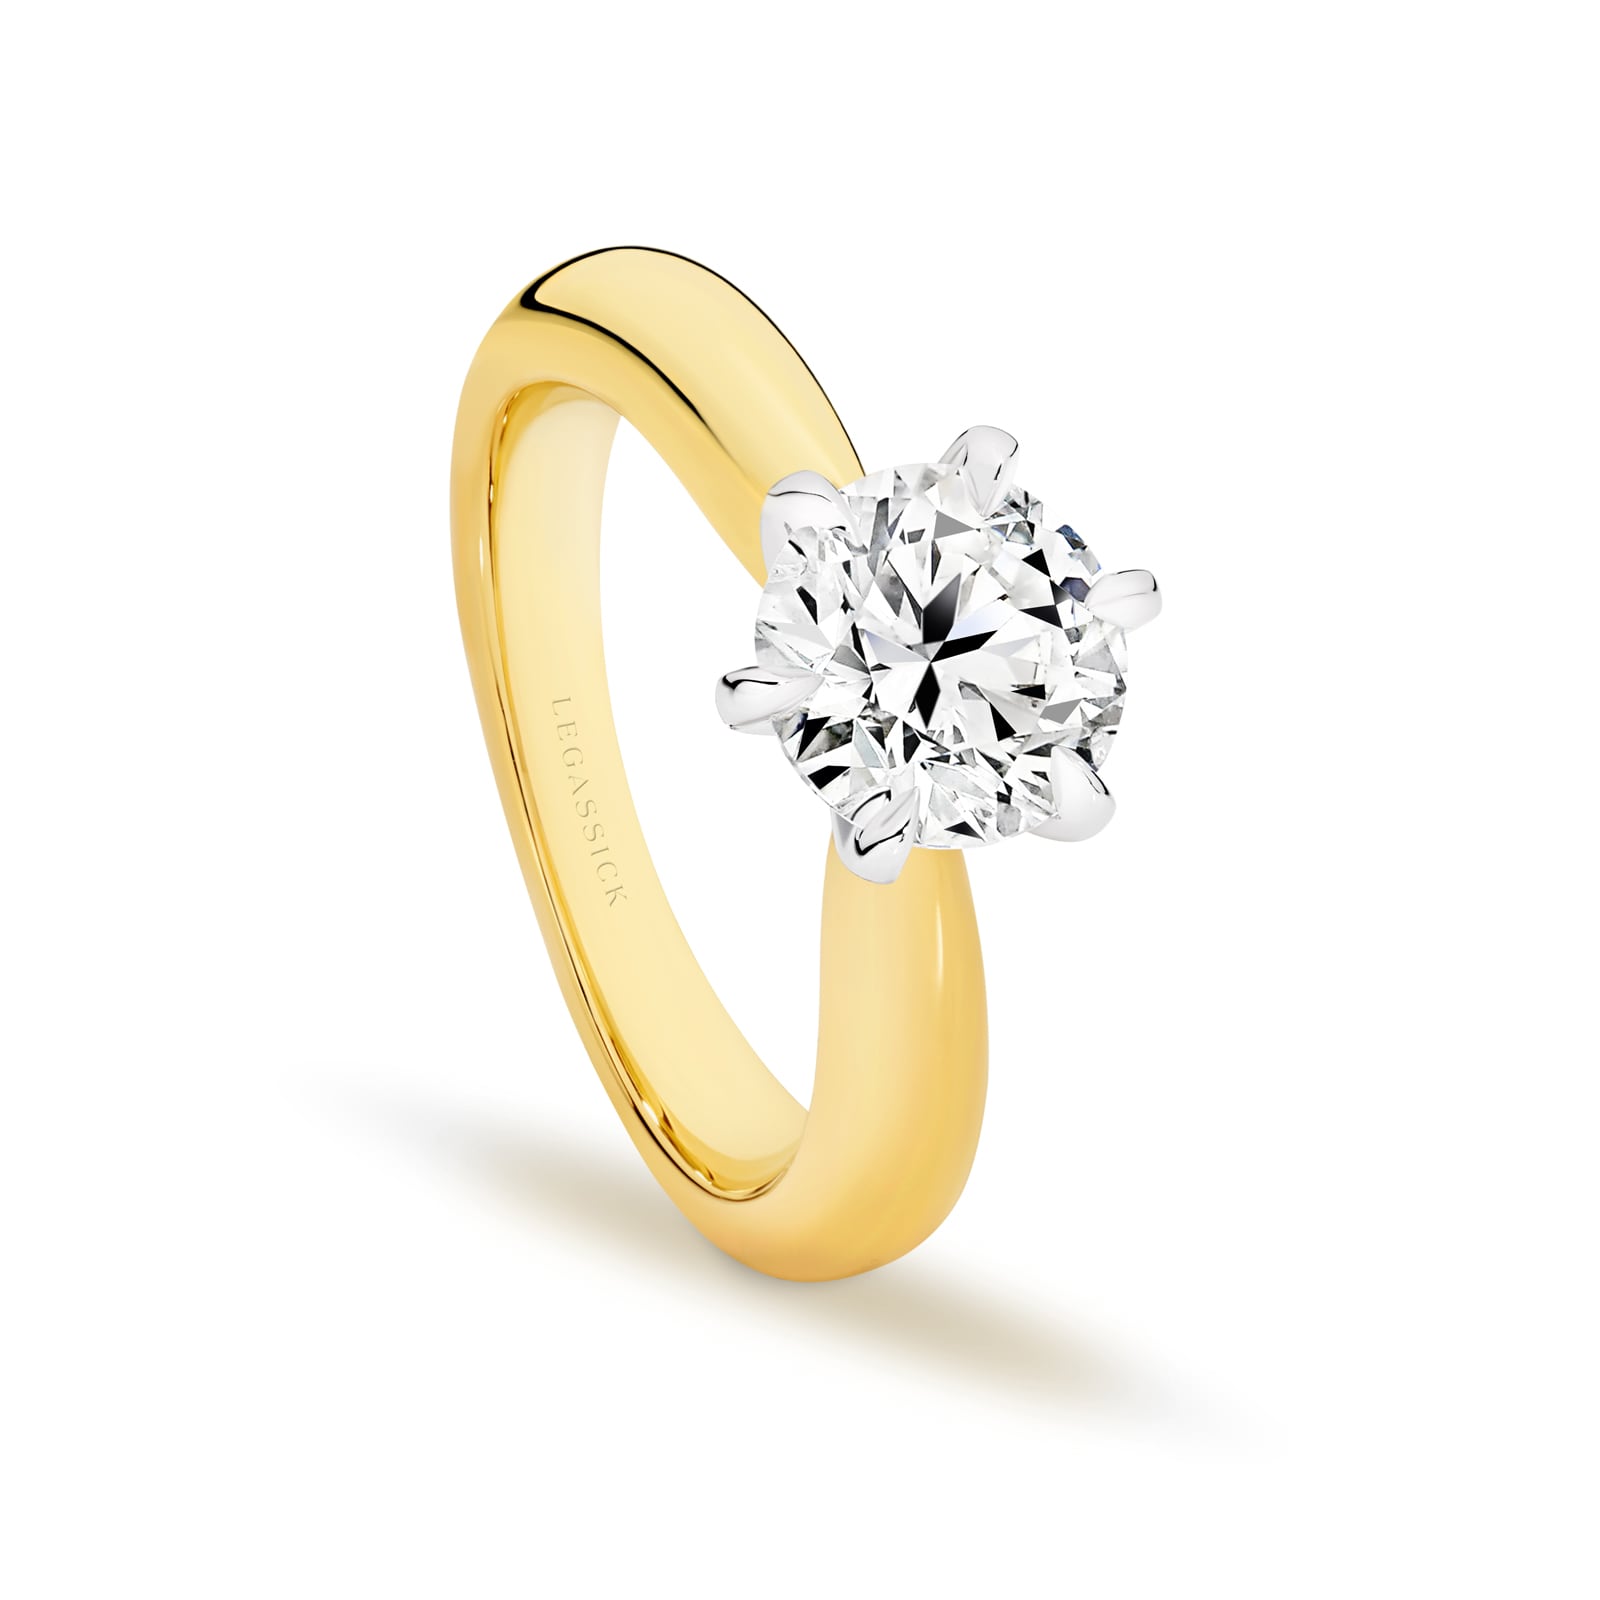 Marilyn is stunning 2.24 carat round brilliant cut solitaire diamond ring. She was designed and handcrafted by LeGassick's Master Jewellers, Gold Coast, Australia.